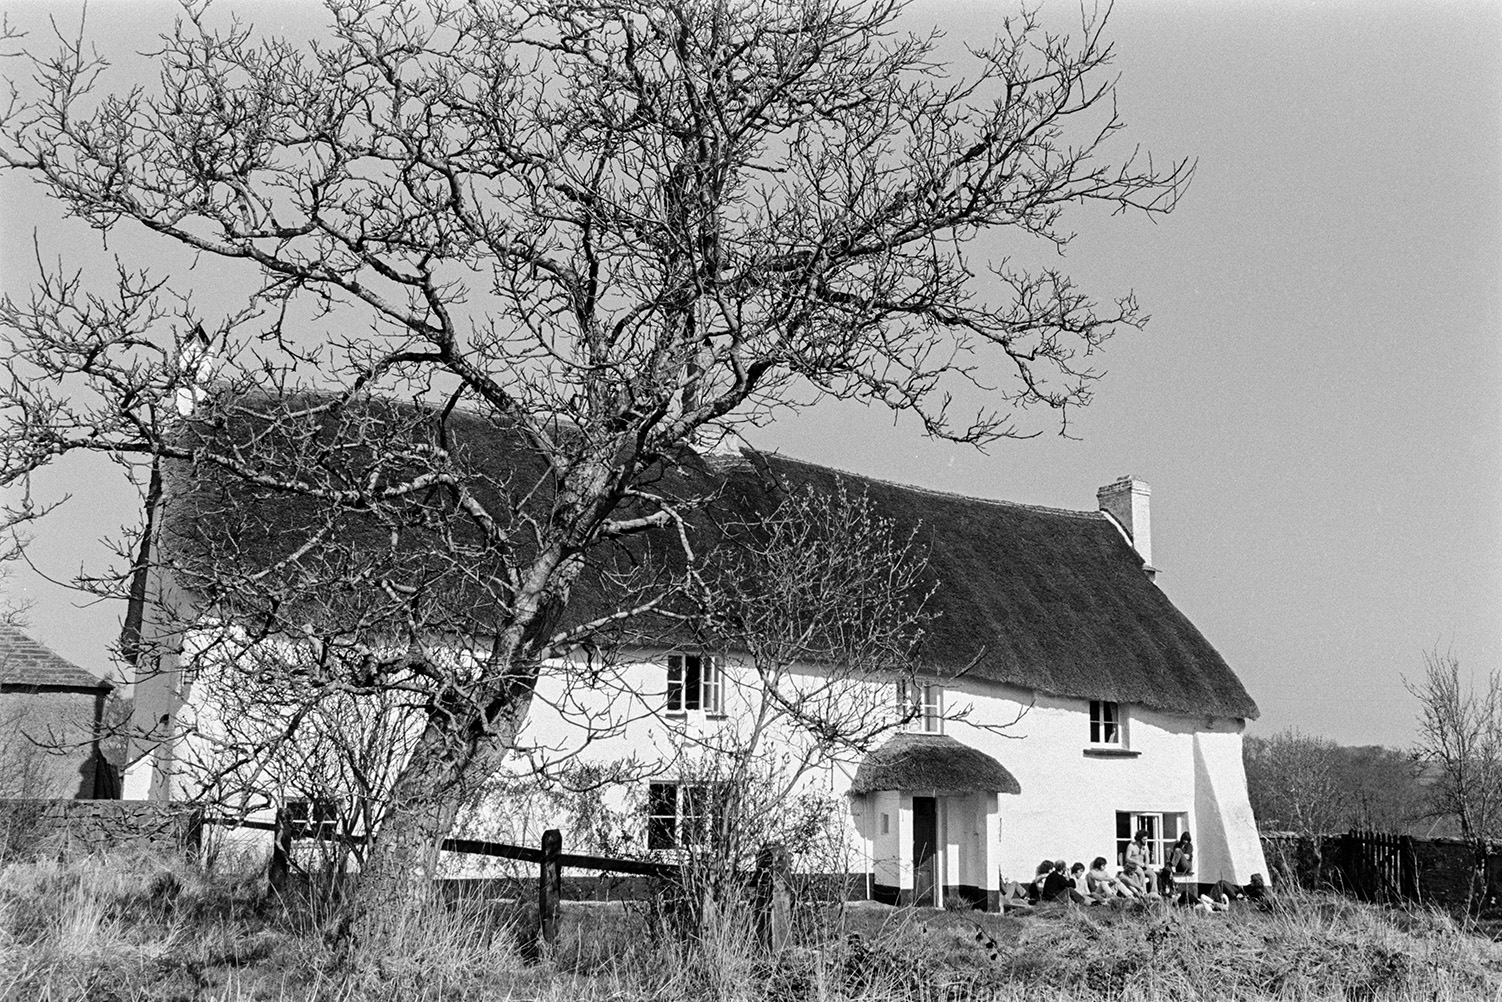 The thatched cottage of the Arvon Centre, behind a tree at Totleigh Barton. A group of people can be seen sat outside the front of the farmhouse. This was the first Arvon Centre.